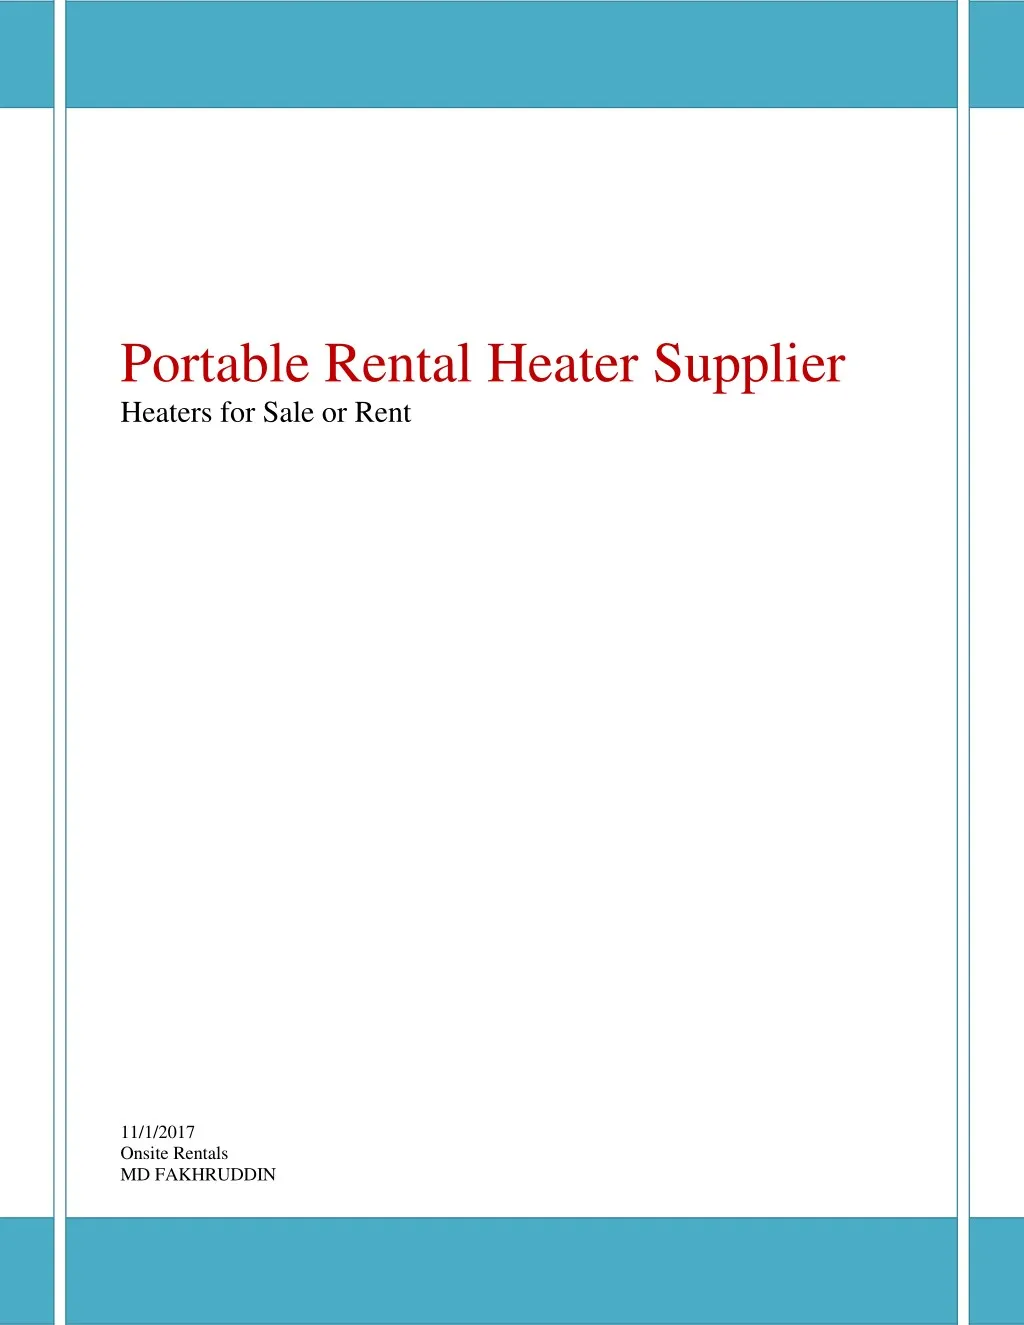 portable rental heater supplier heaters for sale